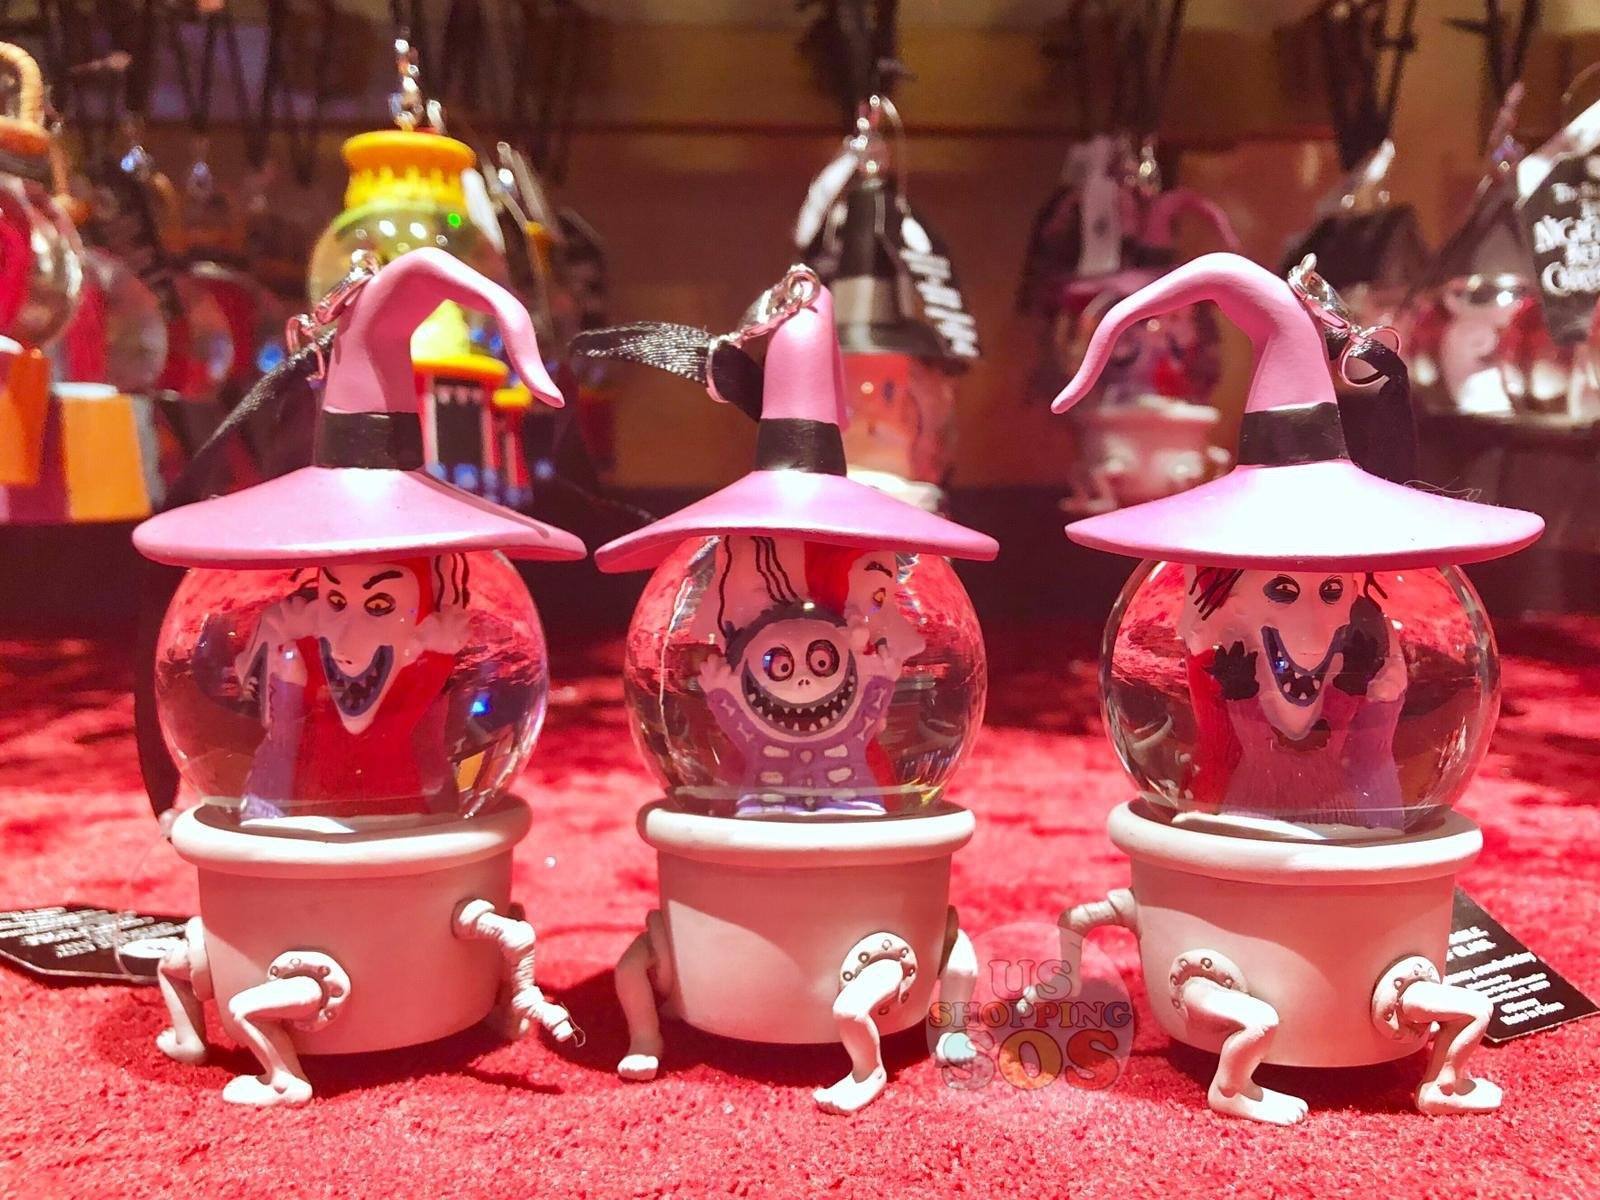 DLR - The Nightmare Before Christmas Snow Globe Ornament - Lock, Shock, and Barrel